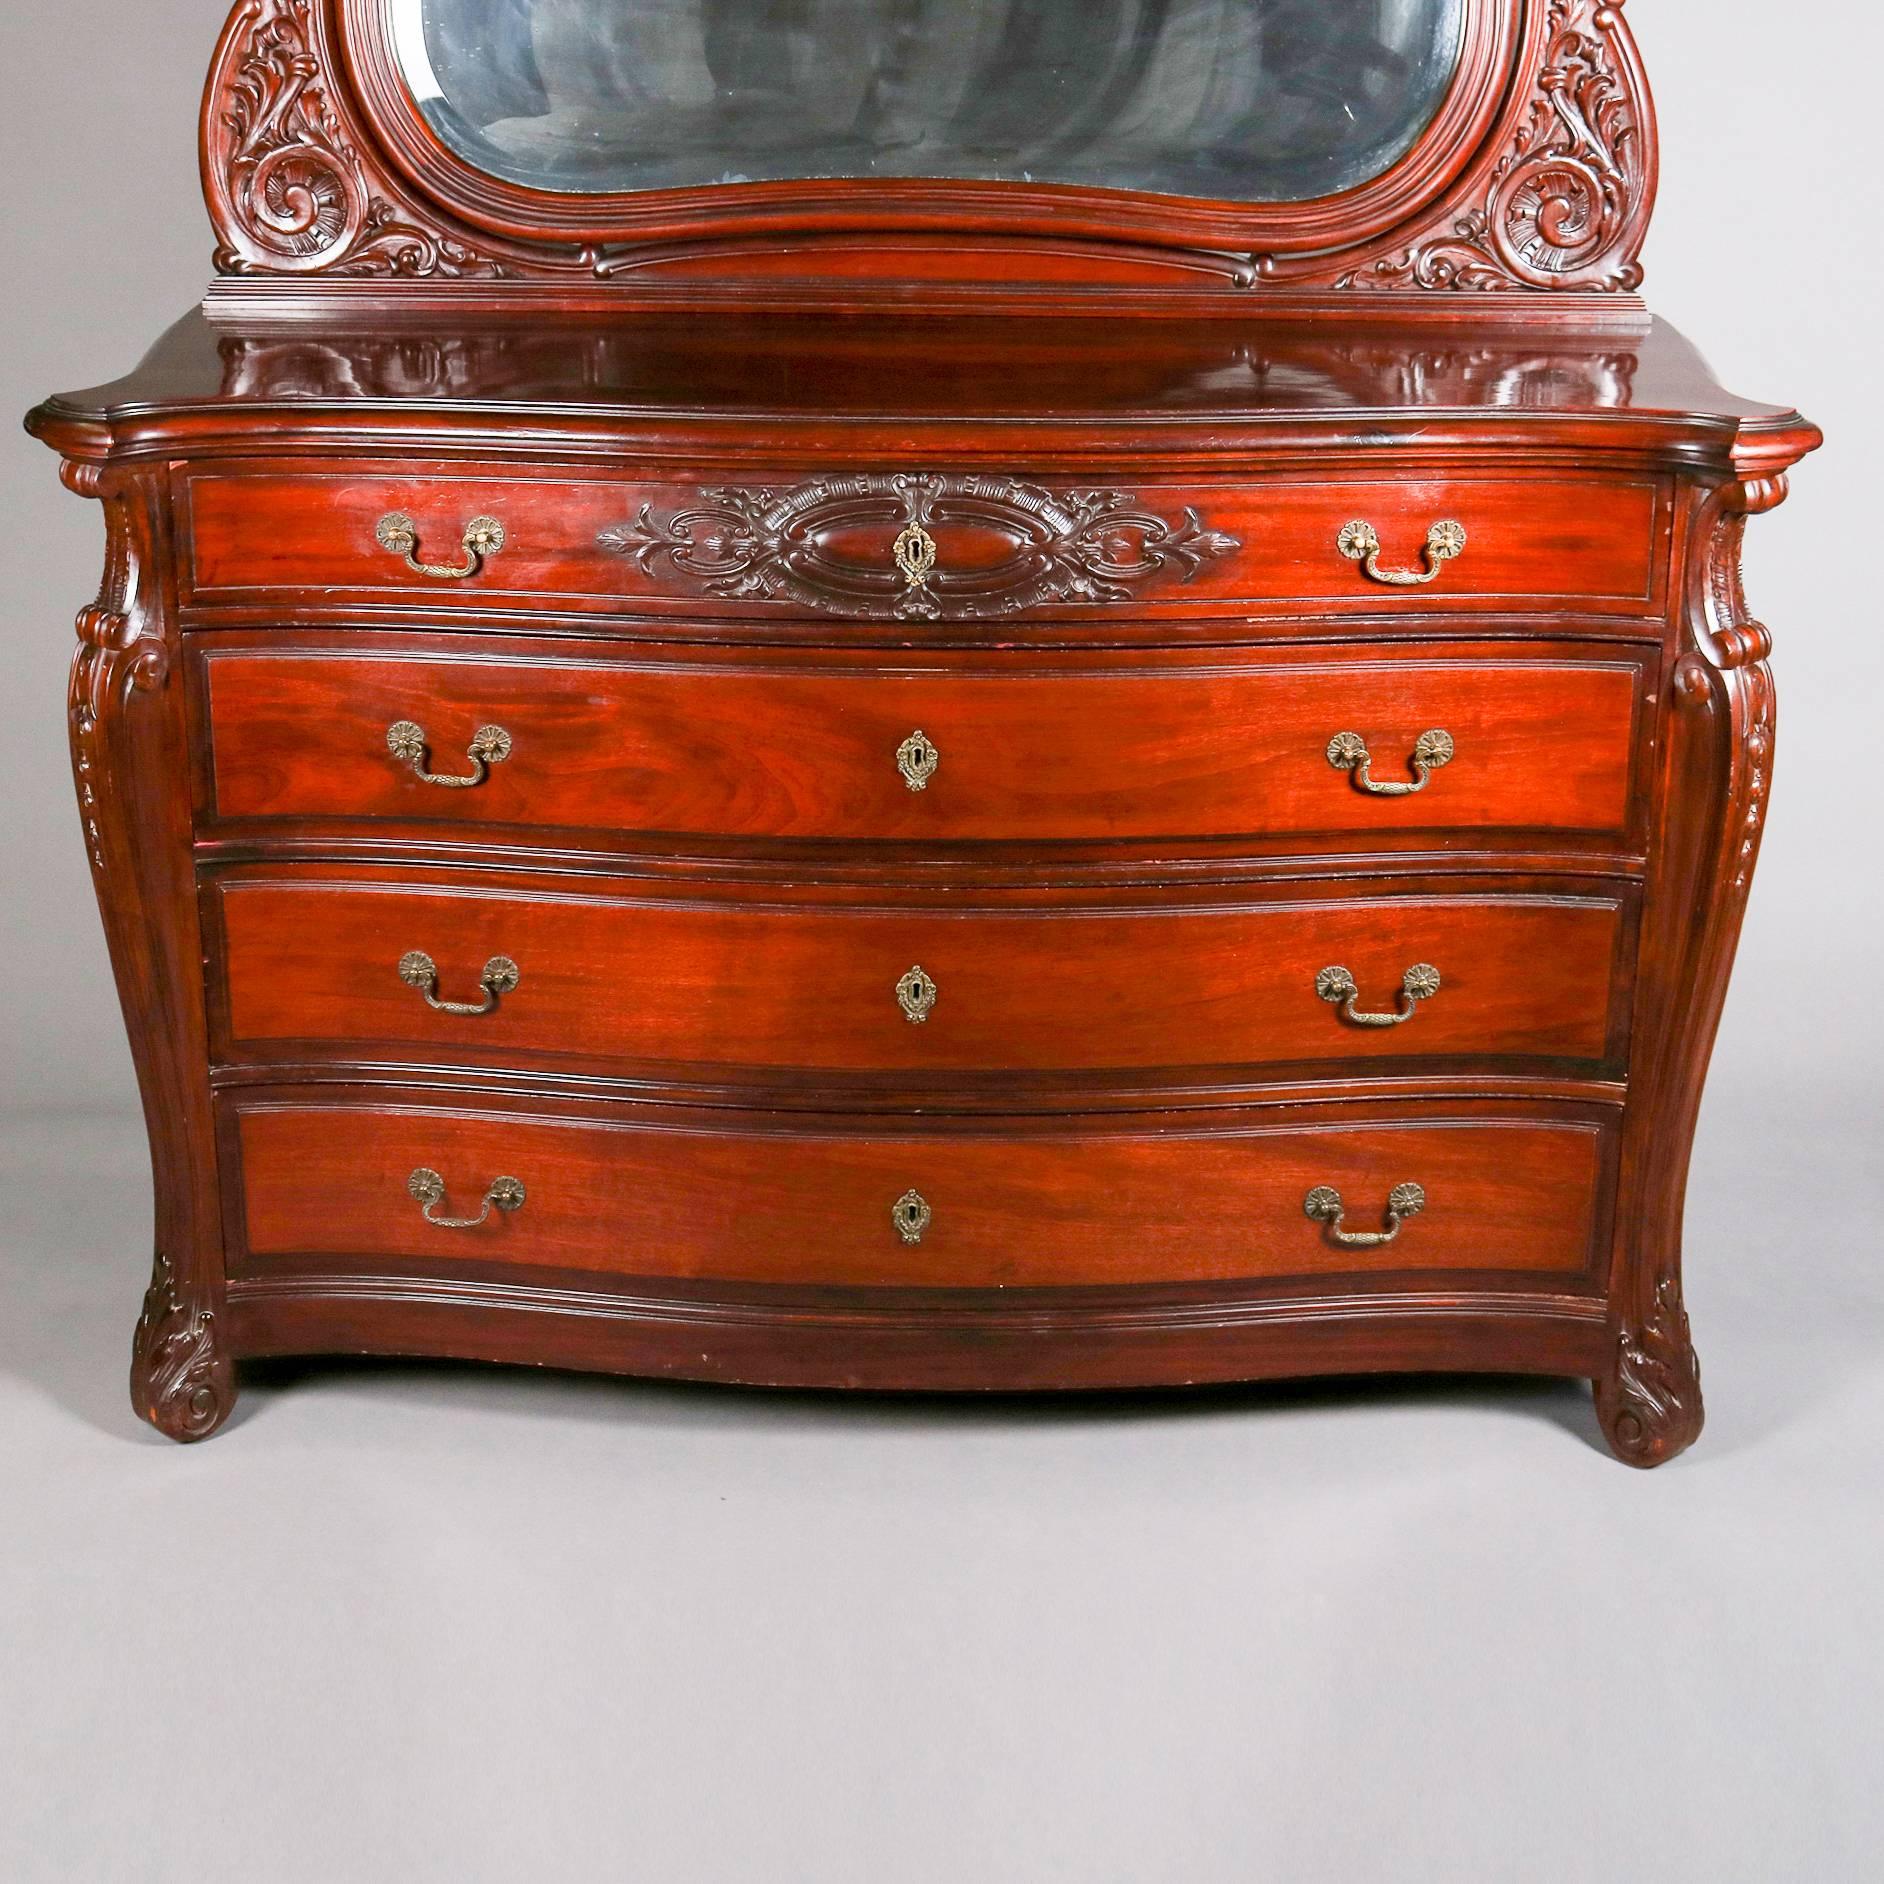 Antique mahogany dresser by Horner Brothers features carved scroll, foliate and gadroon decoration, four long drawers and mirror, 20th century

Measures: 80